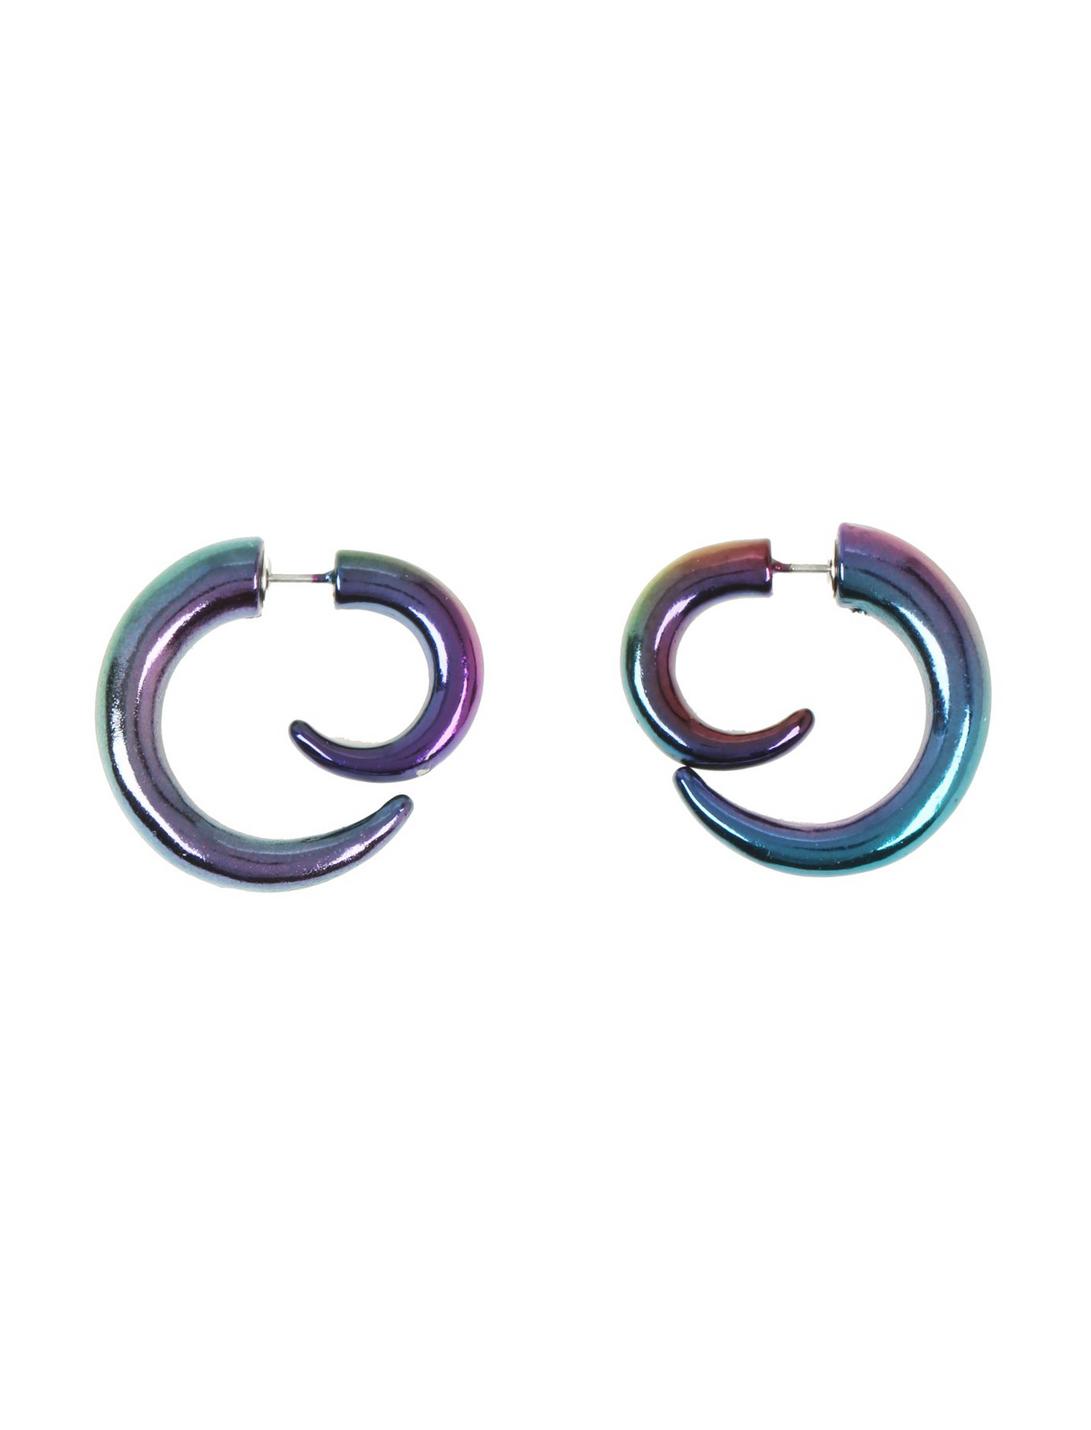 Blackheart Anodized Curved Tunnel 2 Pack, , hi-res